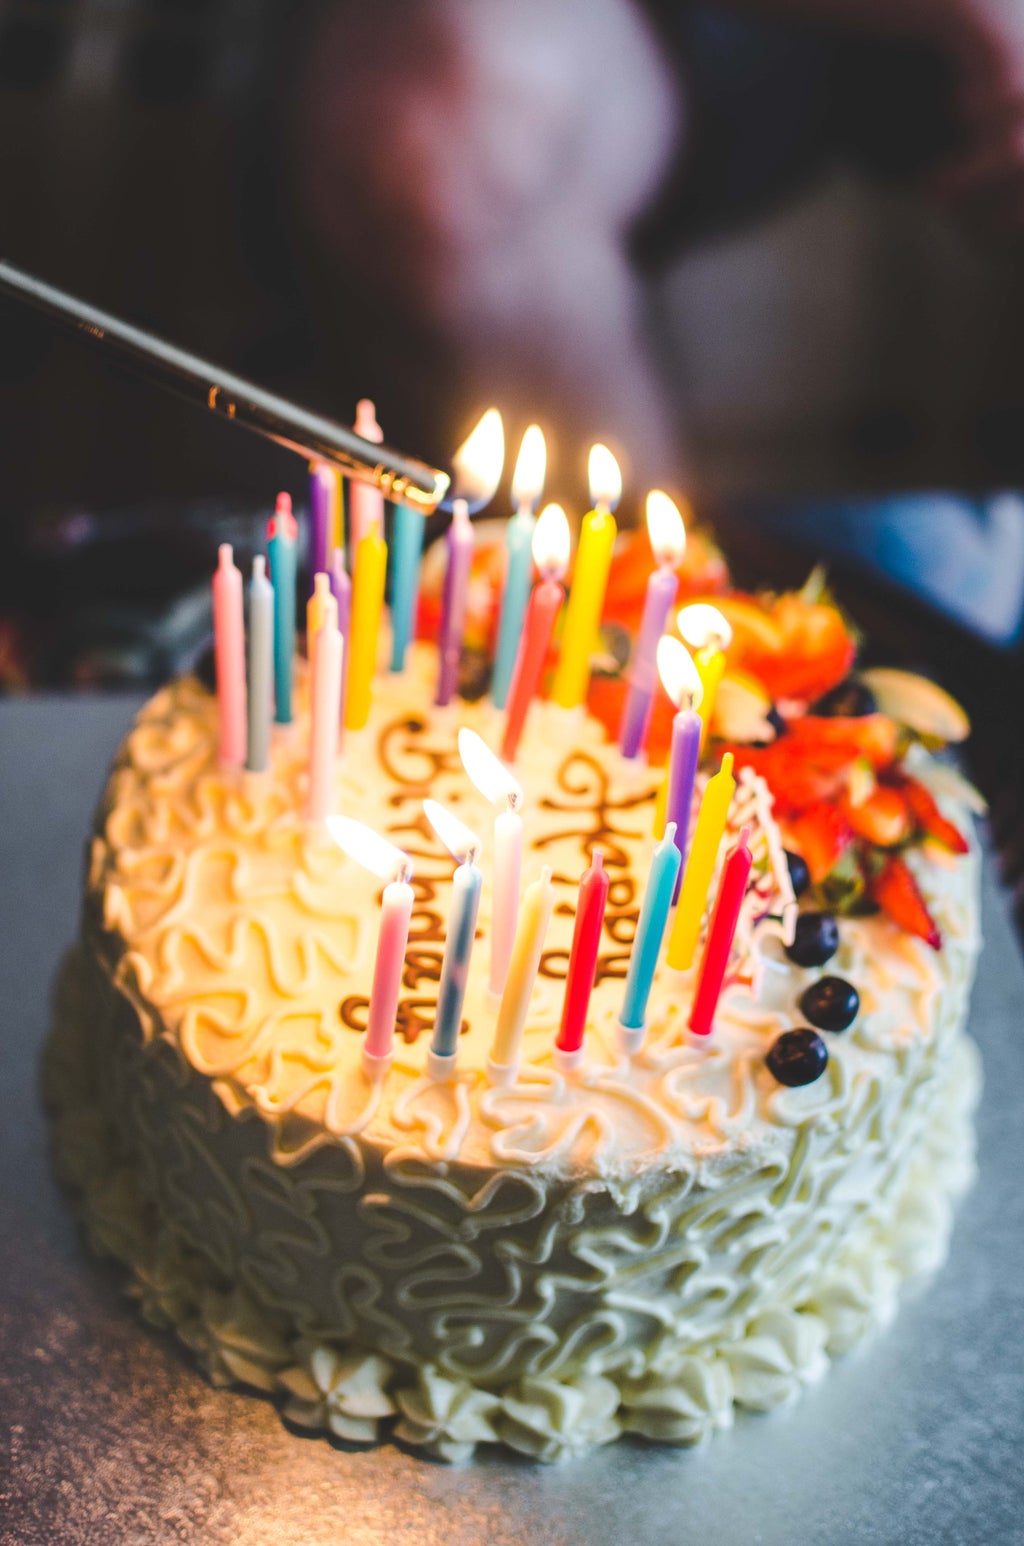 Candles being lit on birthday cake